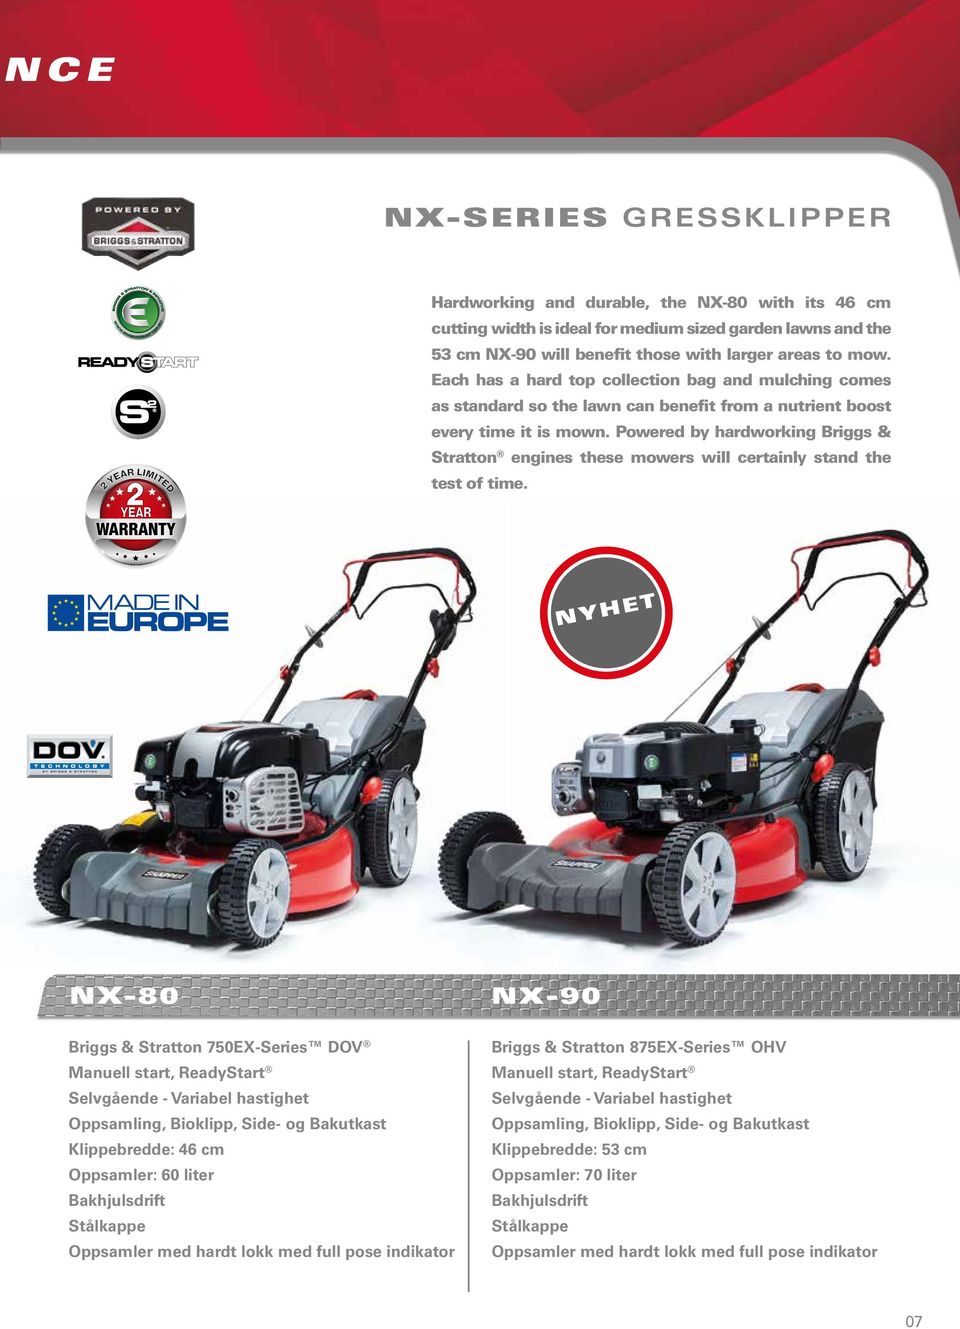 Powered by hardworking Briggs & Stratton engines these mowers will certainly stand the test of time.